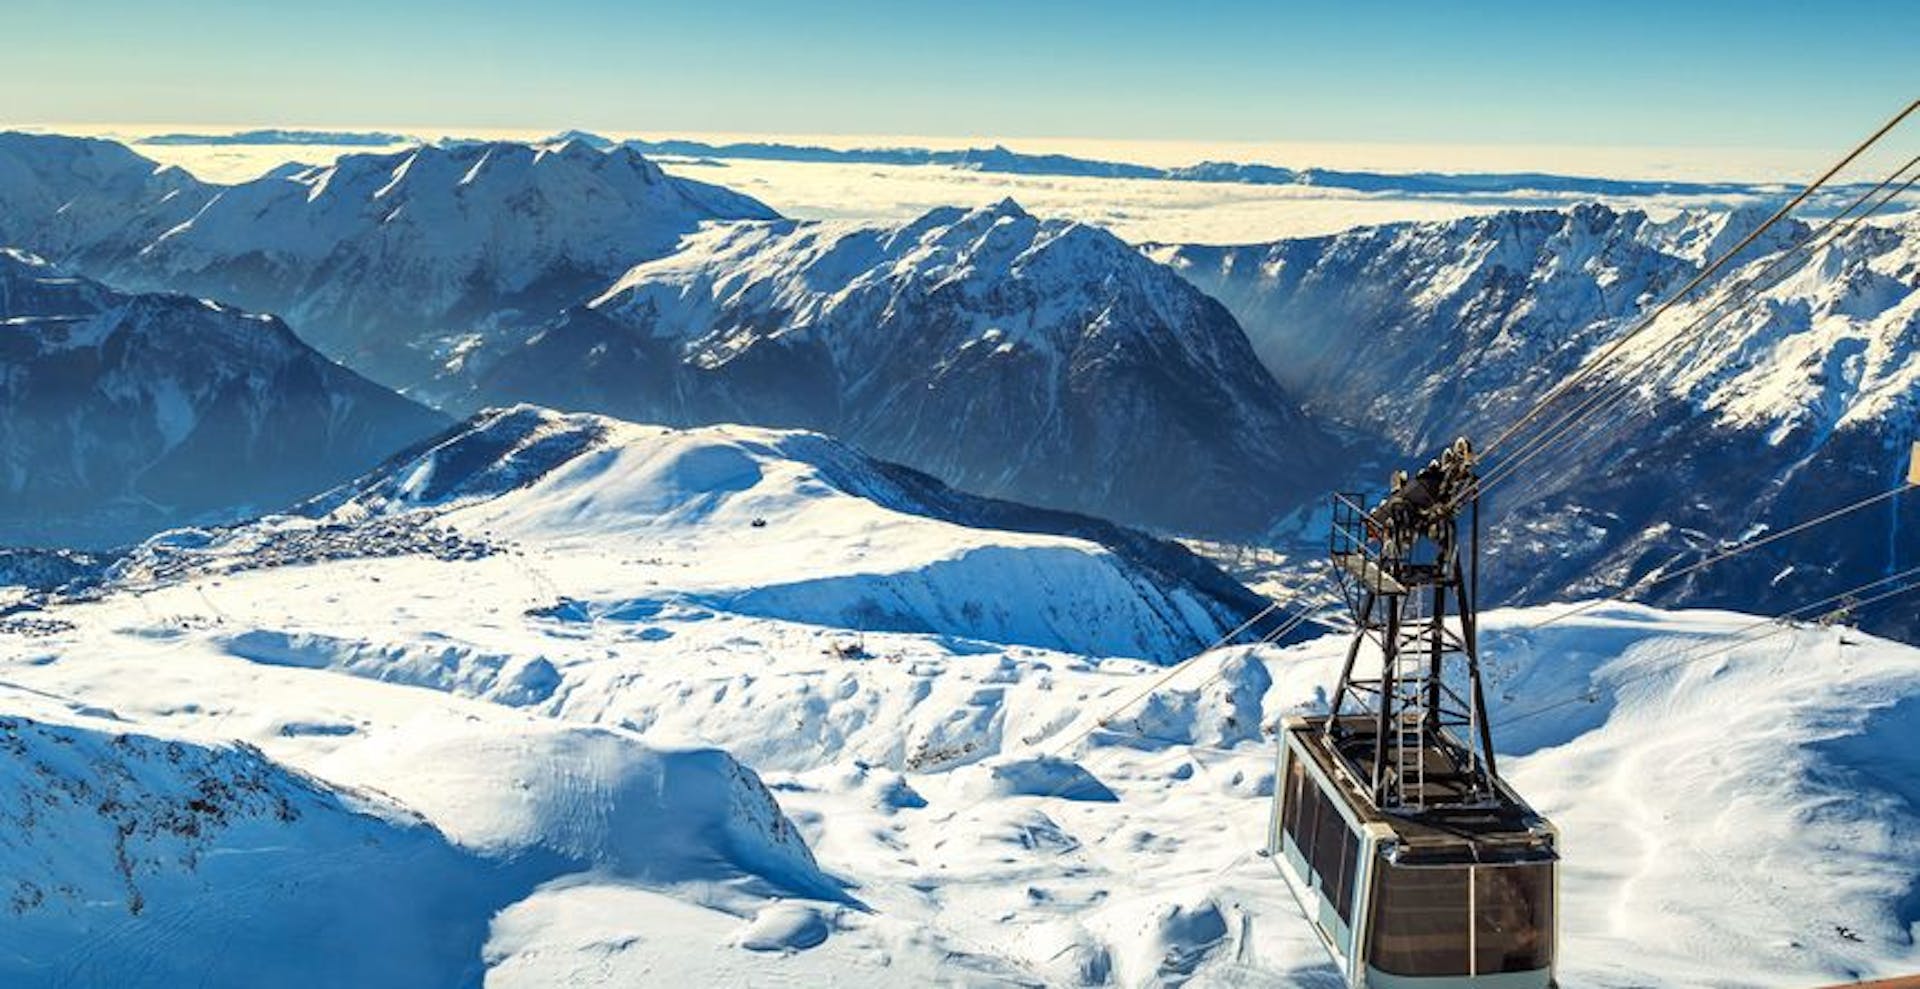 Top up the tan: Alpe d'Huez is one of the sunniest spots in the French Alps